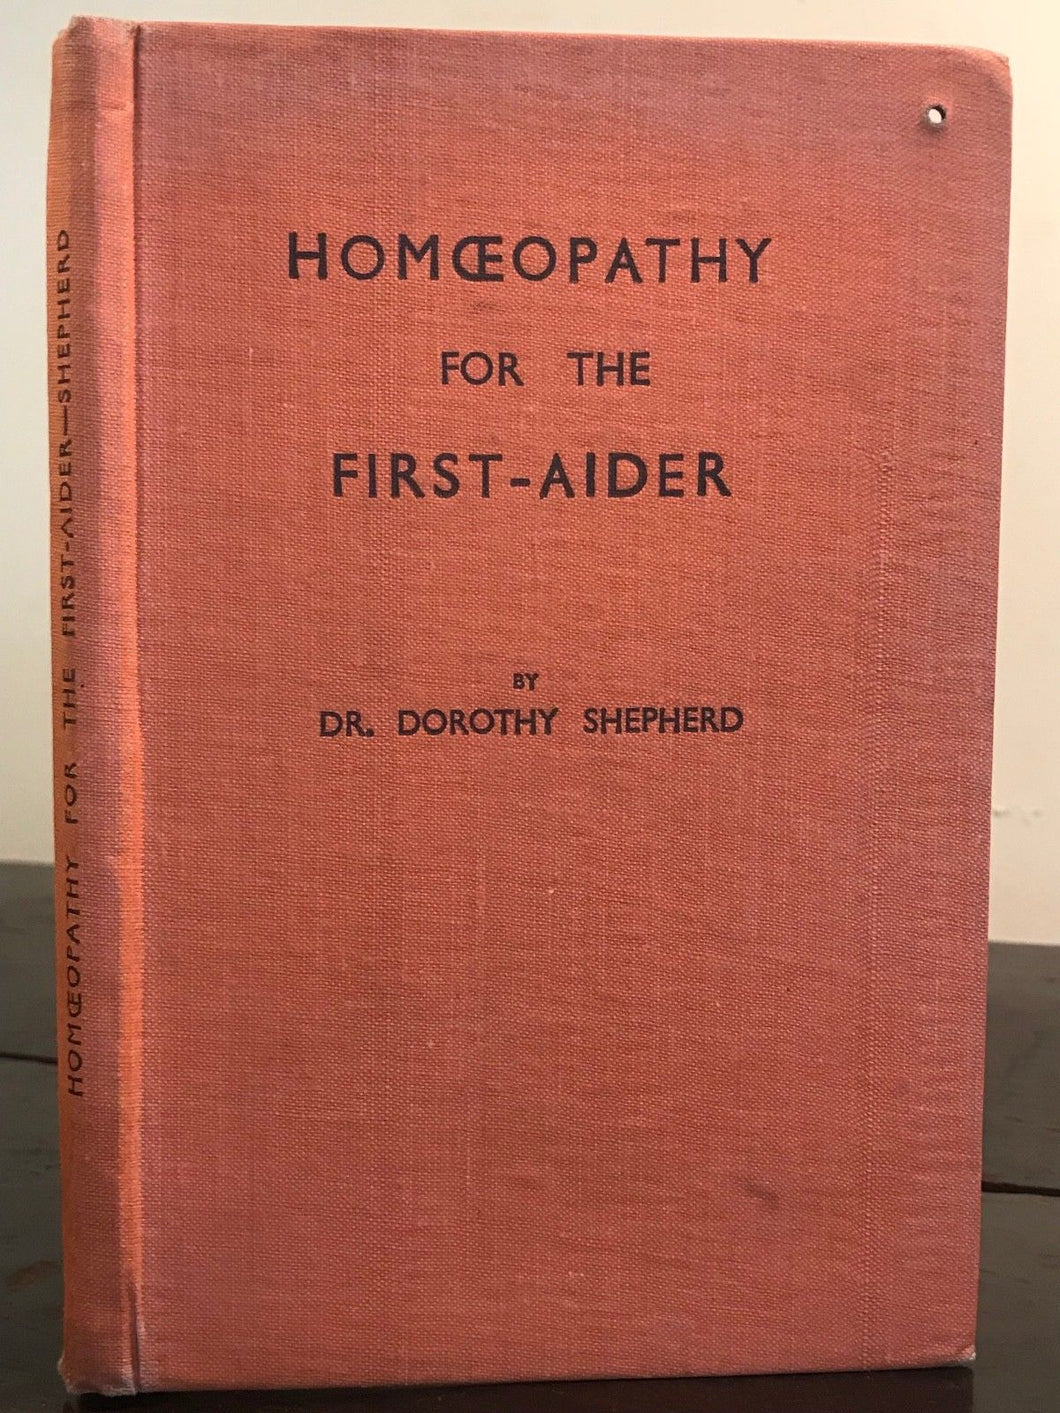 HOMOEOPATHY FOR THE FIRST-AIDER - DR. DOROTHY SHEPHERD, 1st/1st 1945 - Herbals